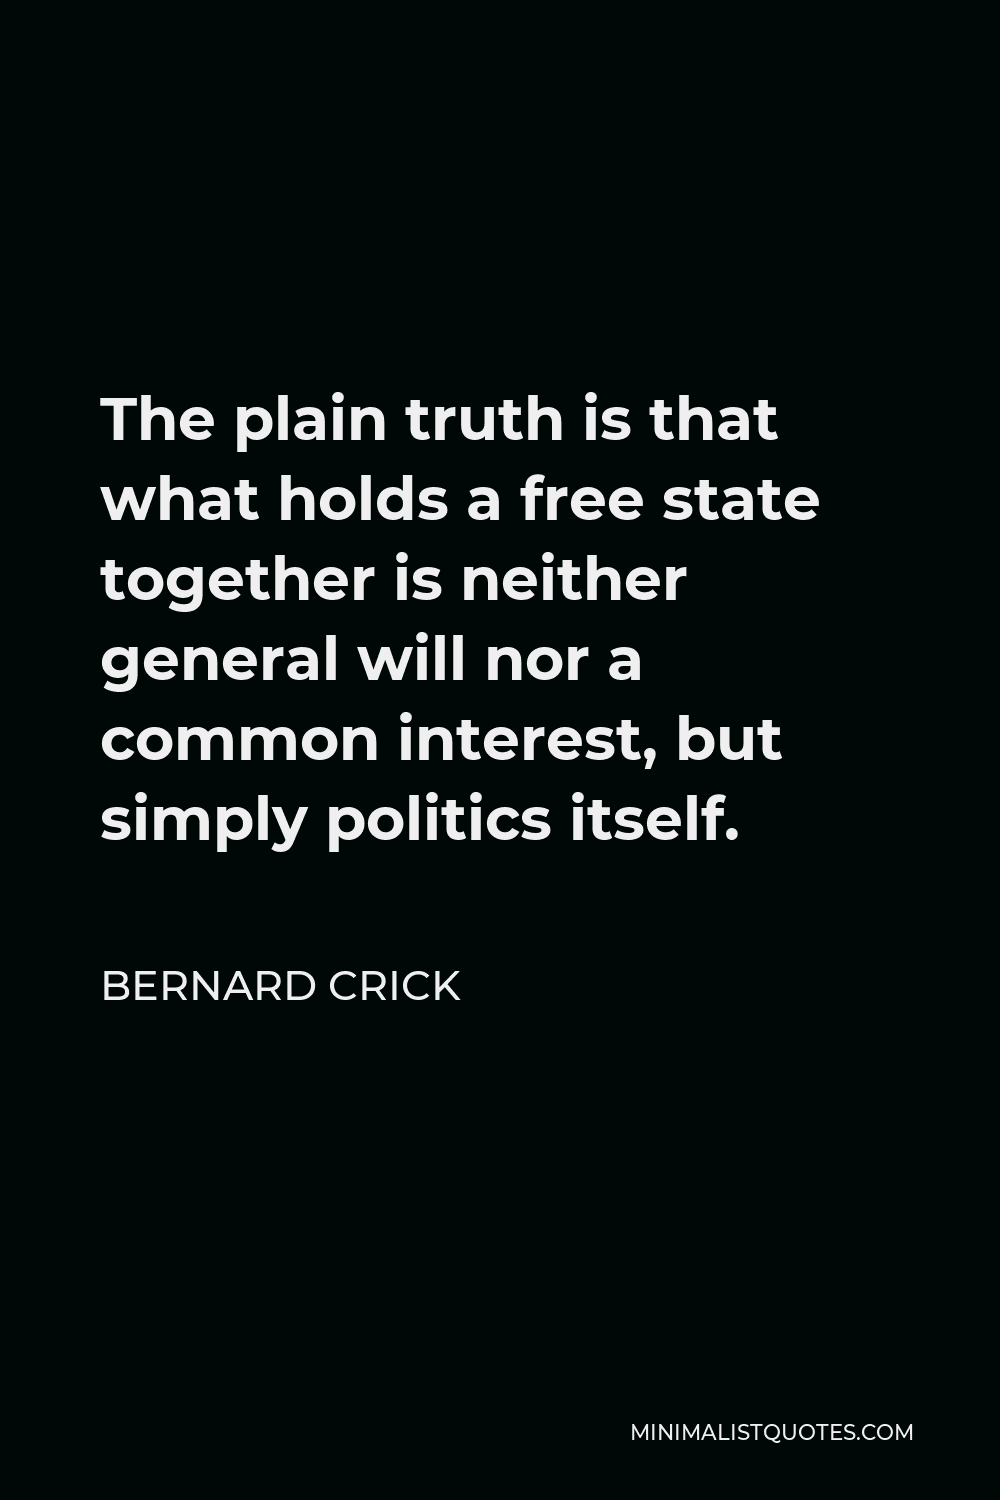 Bernard Crick Quote - The plain truth is that what holds a free state together is neither general will nor a common interest, but simply politics itself.